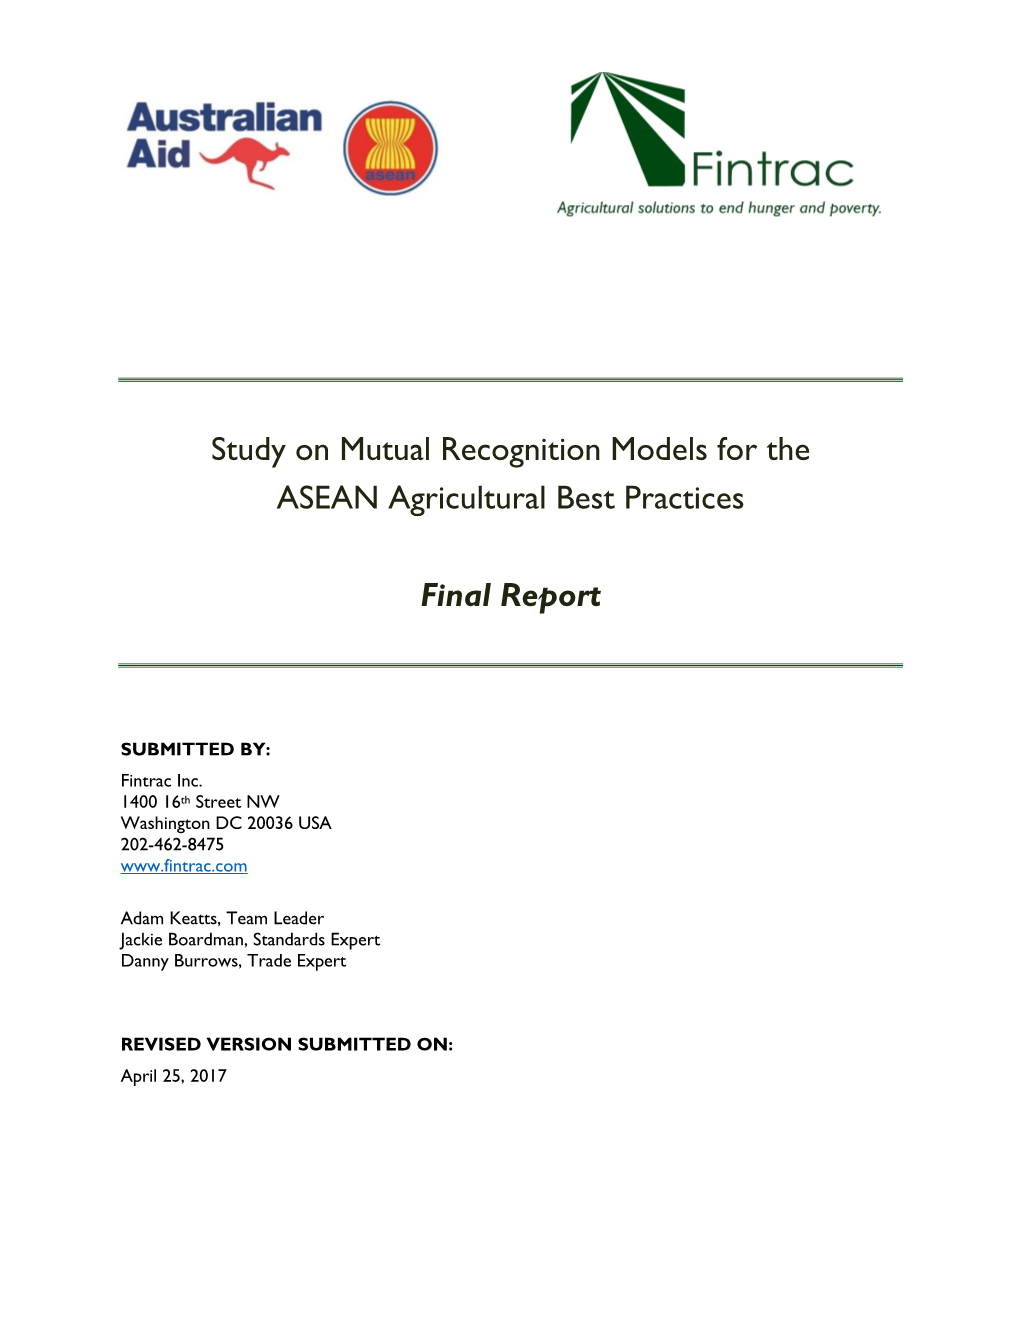 Study on Mutual Recognition Models for the ASEAN Agricultural Best Practices